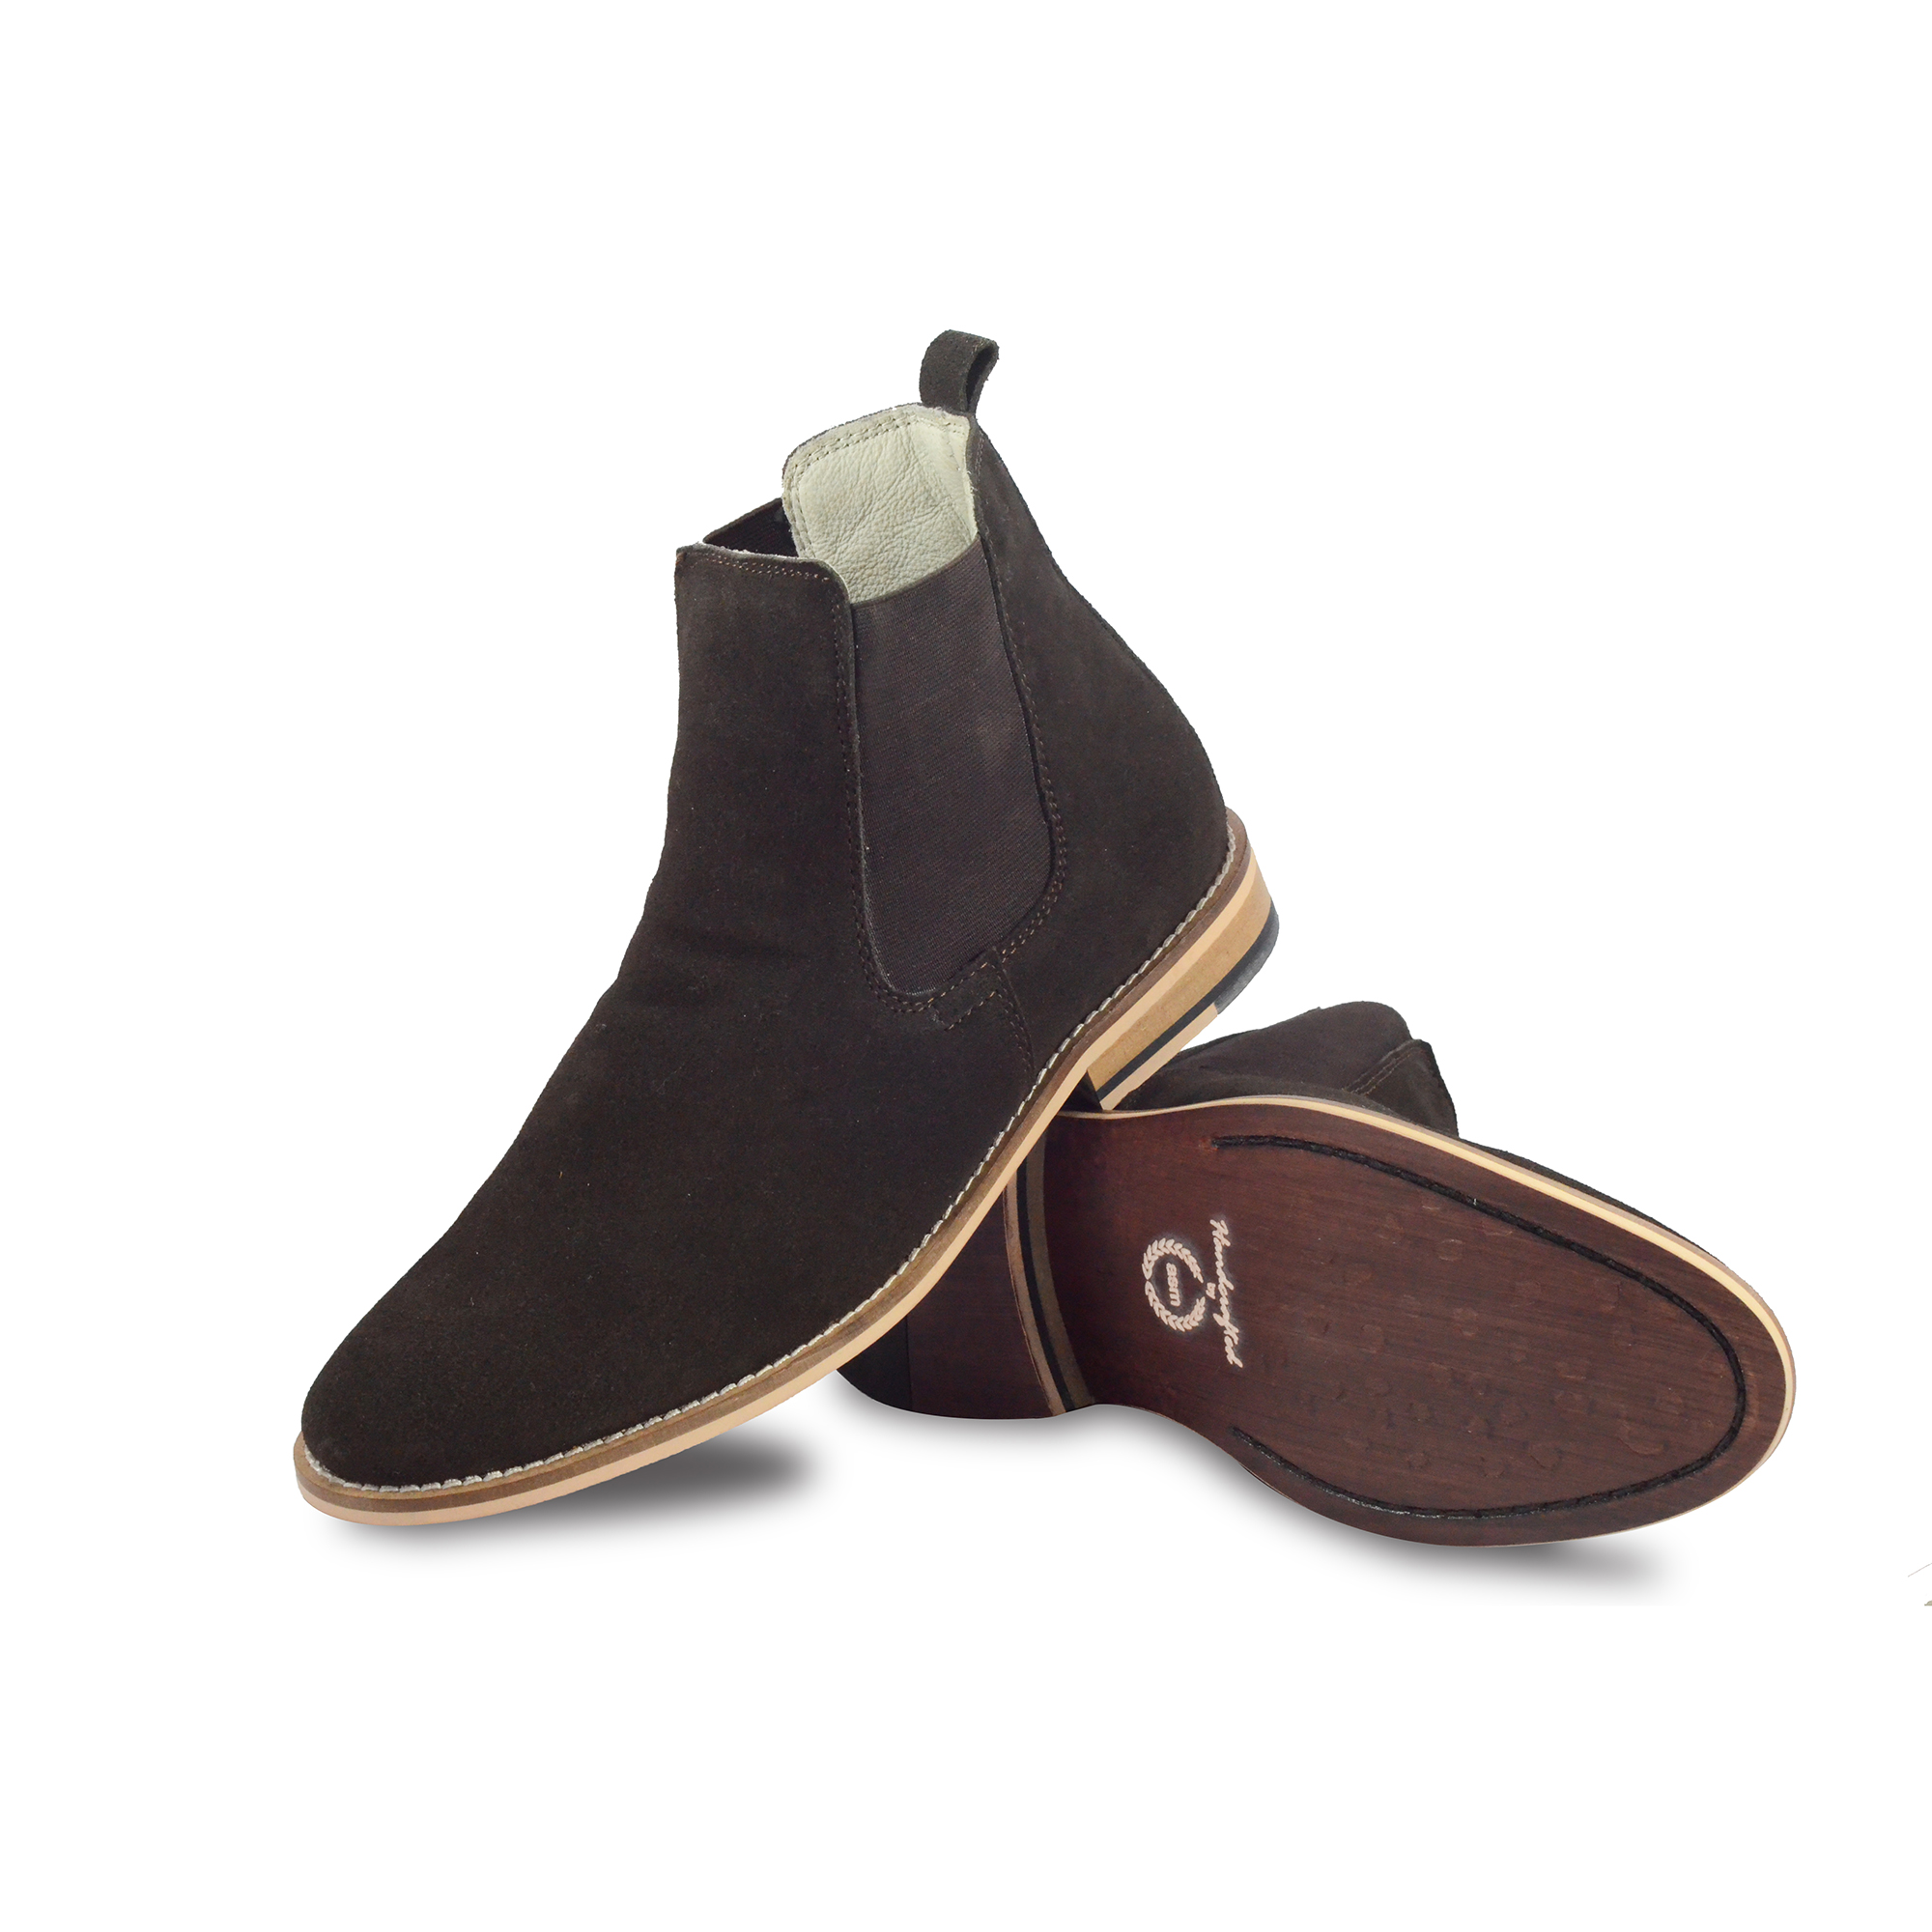 Boots - Buy 6 inches Leather Chelsea Boots at Factory Prices. | Agra Shoe Mart